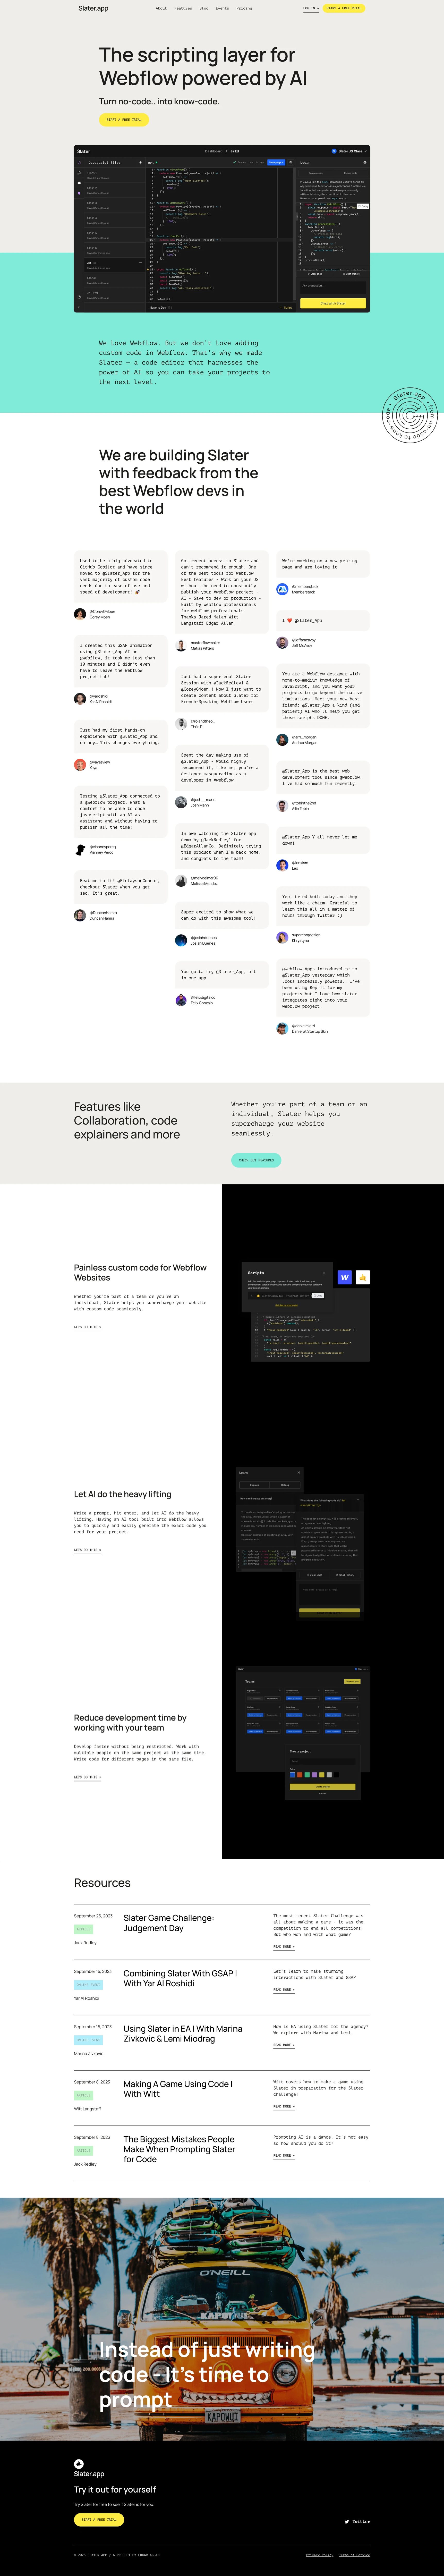 Slater Landing Page Example: The scripting layer for Webflow powered by AI. Turn no-code.. into know-code. Slater is an modern coding environment with an inbuilt AI tool. Get custom code quickly with no character limits.